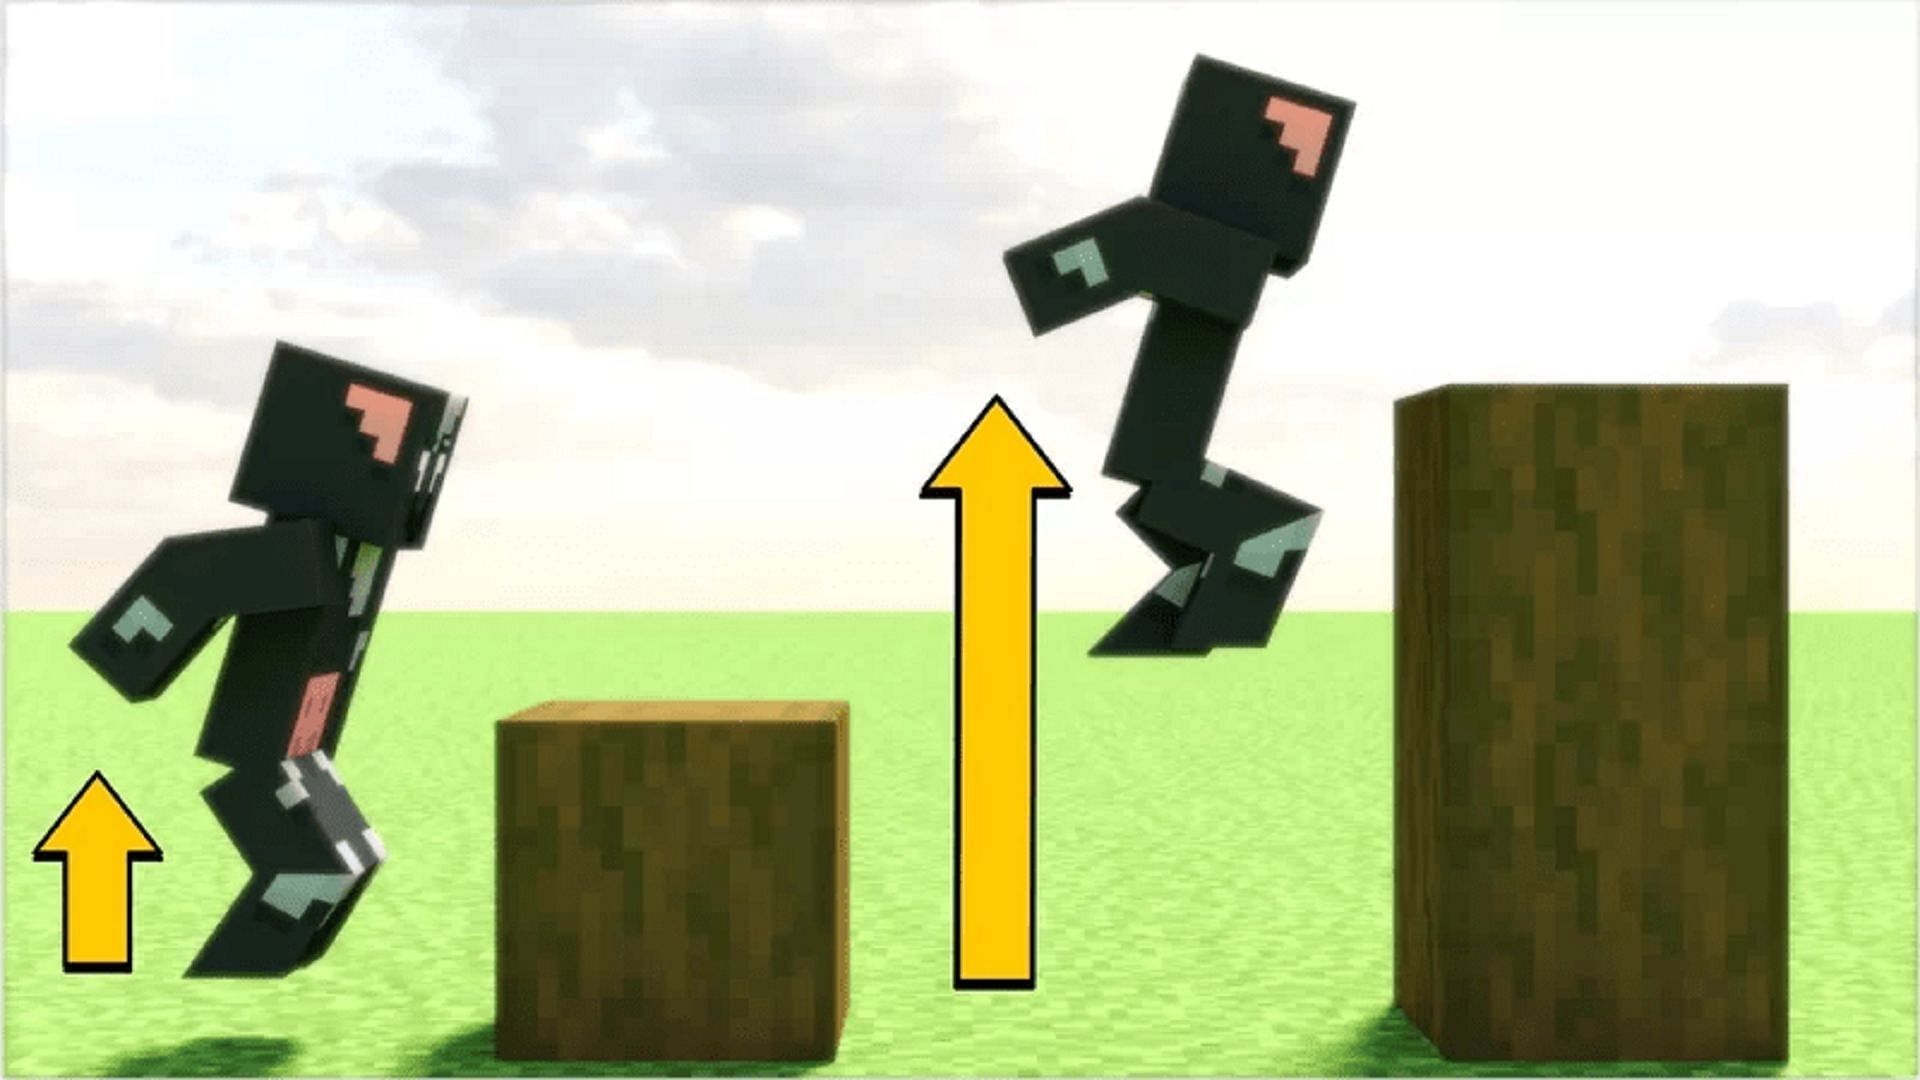 Jump Boost helps players clear hurdles with ease (Image via CrazyCowMM/Planet Minecraft)